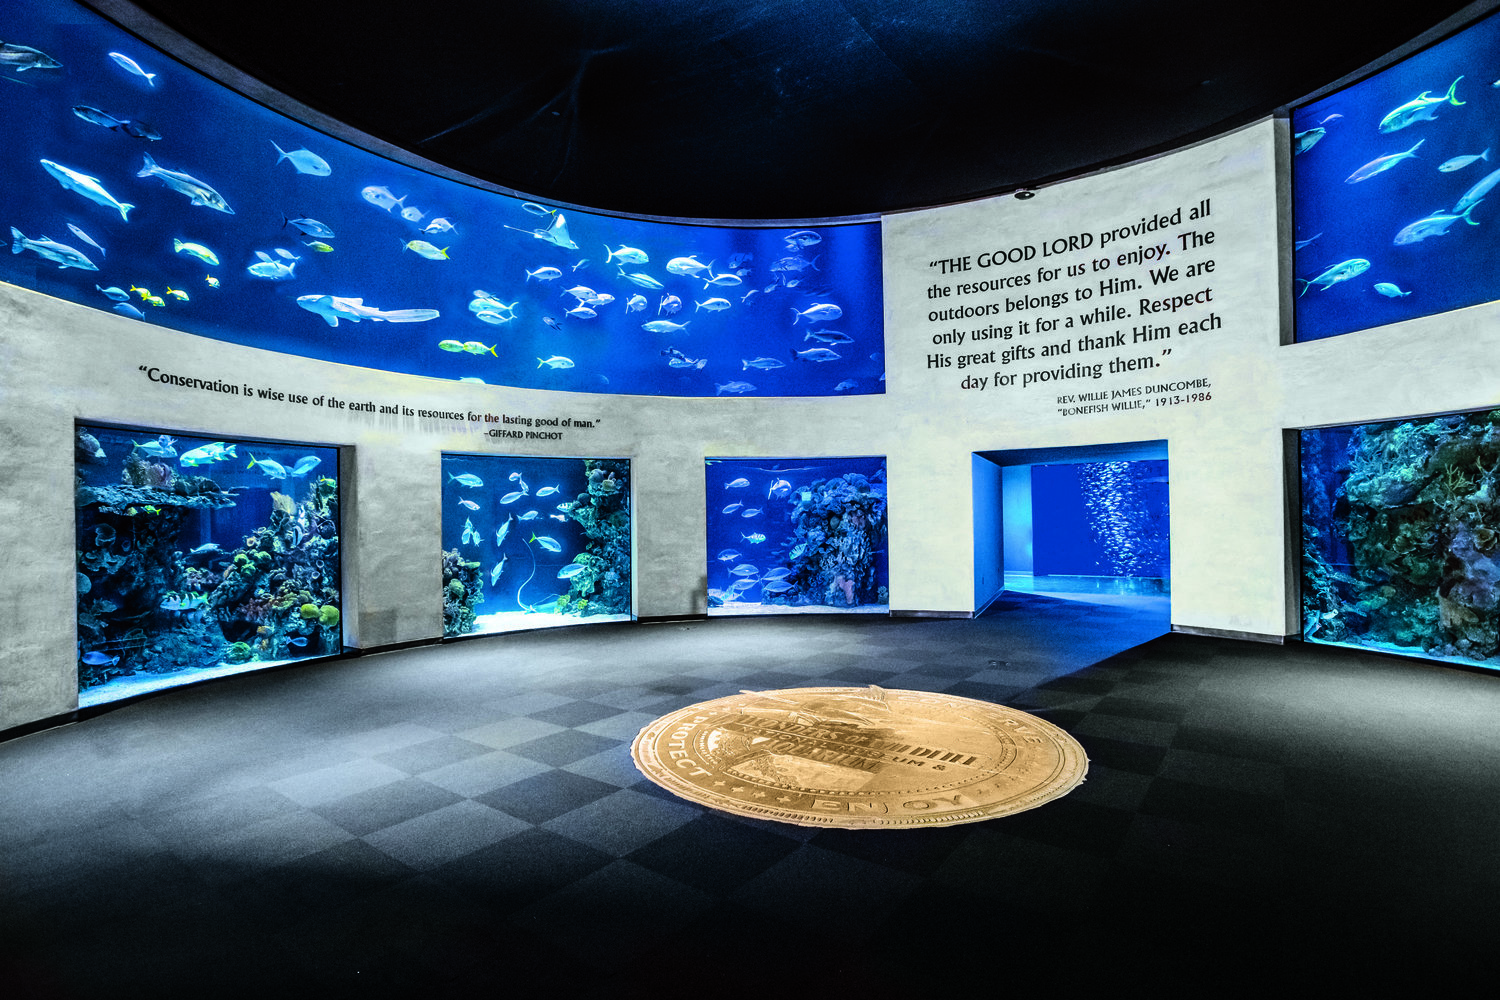 Wonders of Wildlife National Museum & Aquarium is the only attraction in Missouri on the list.